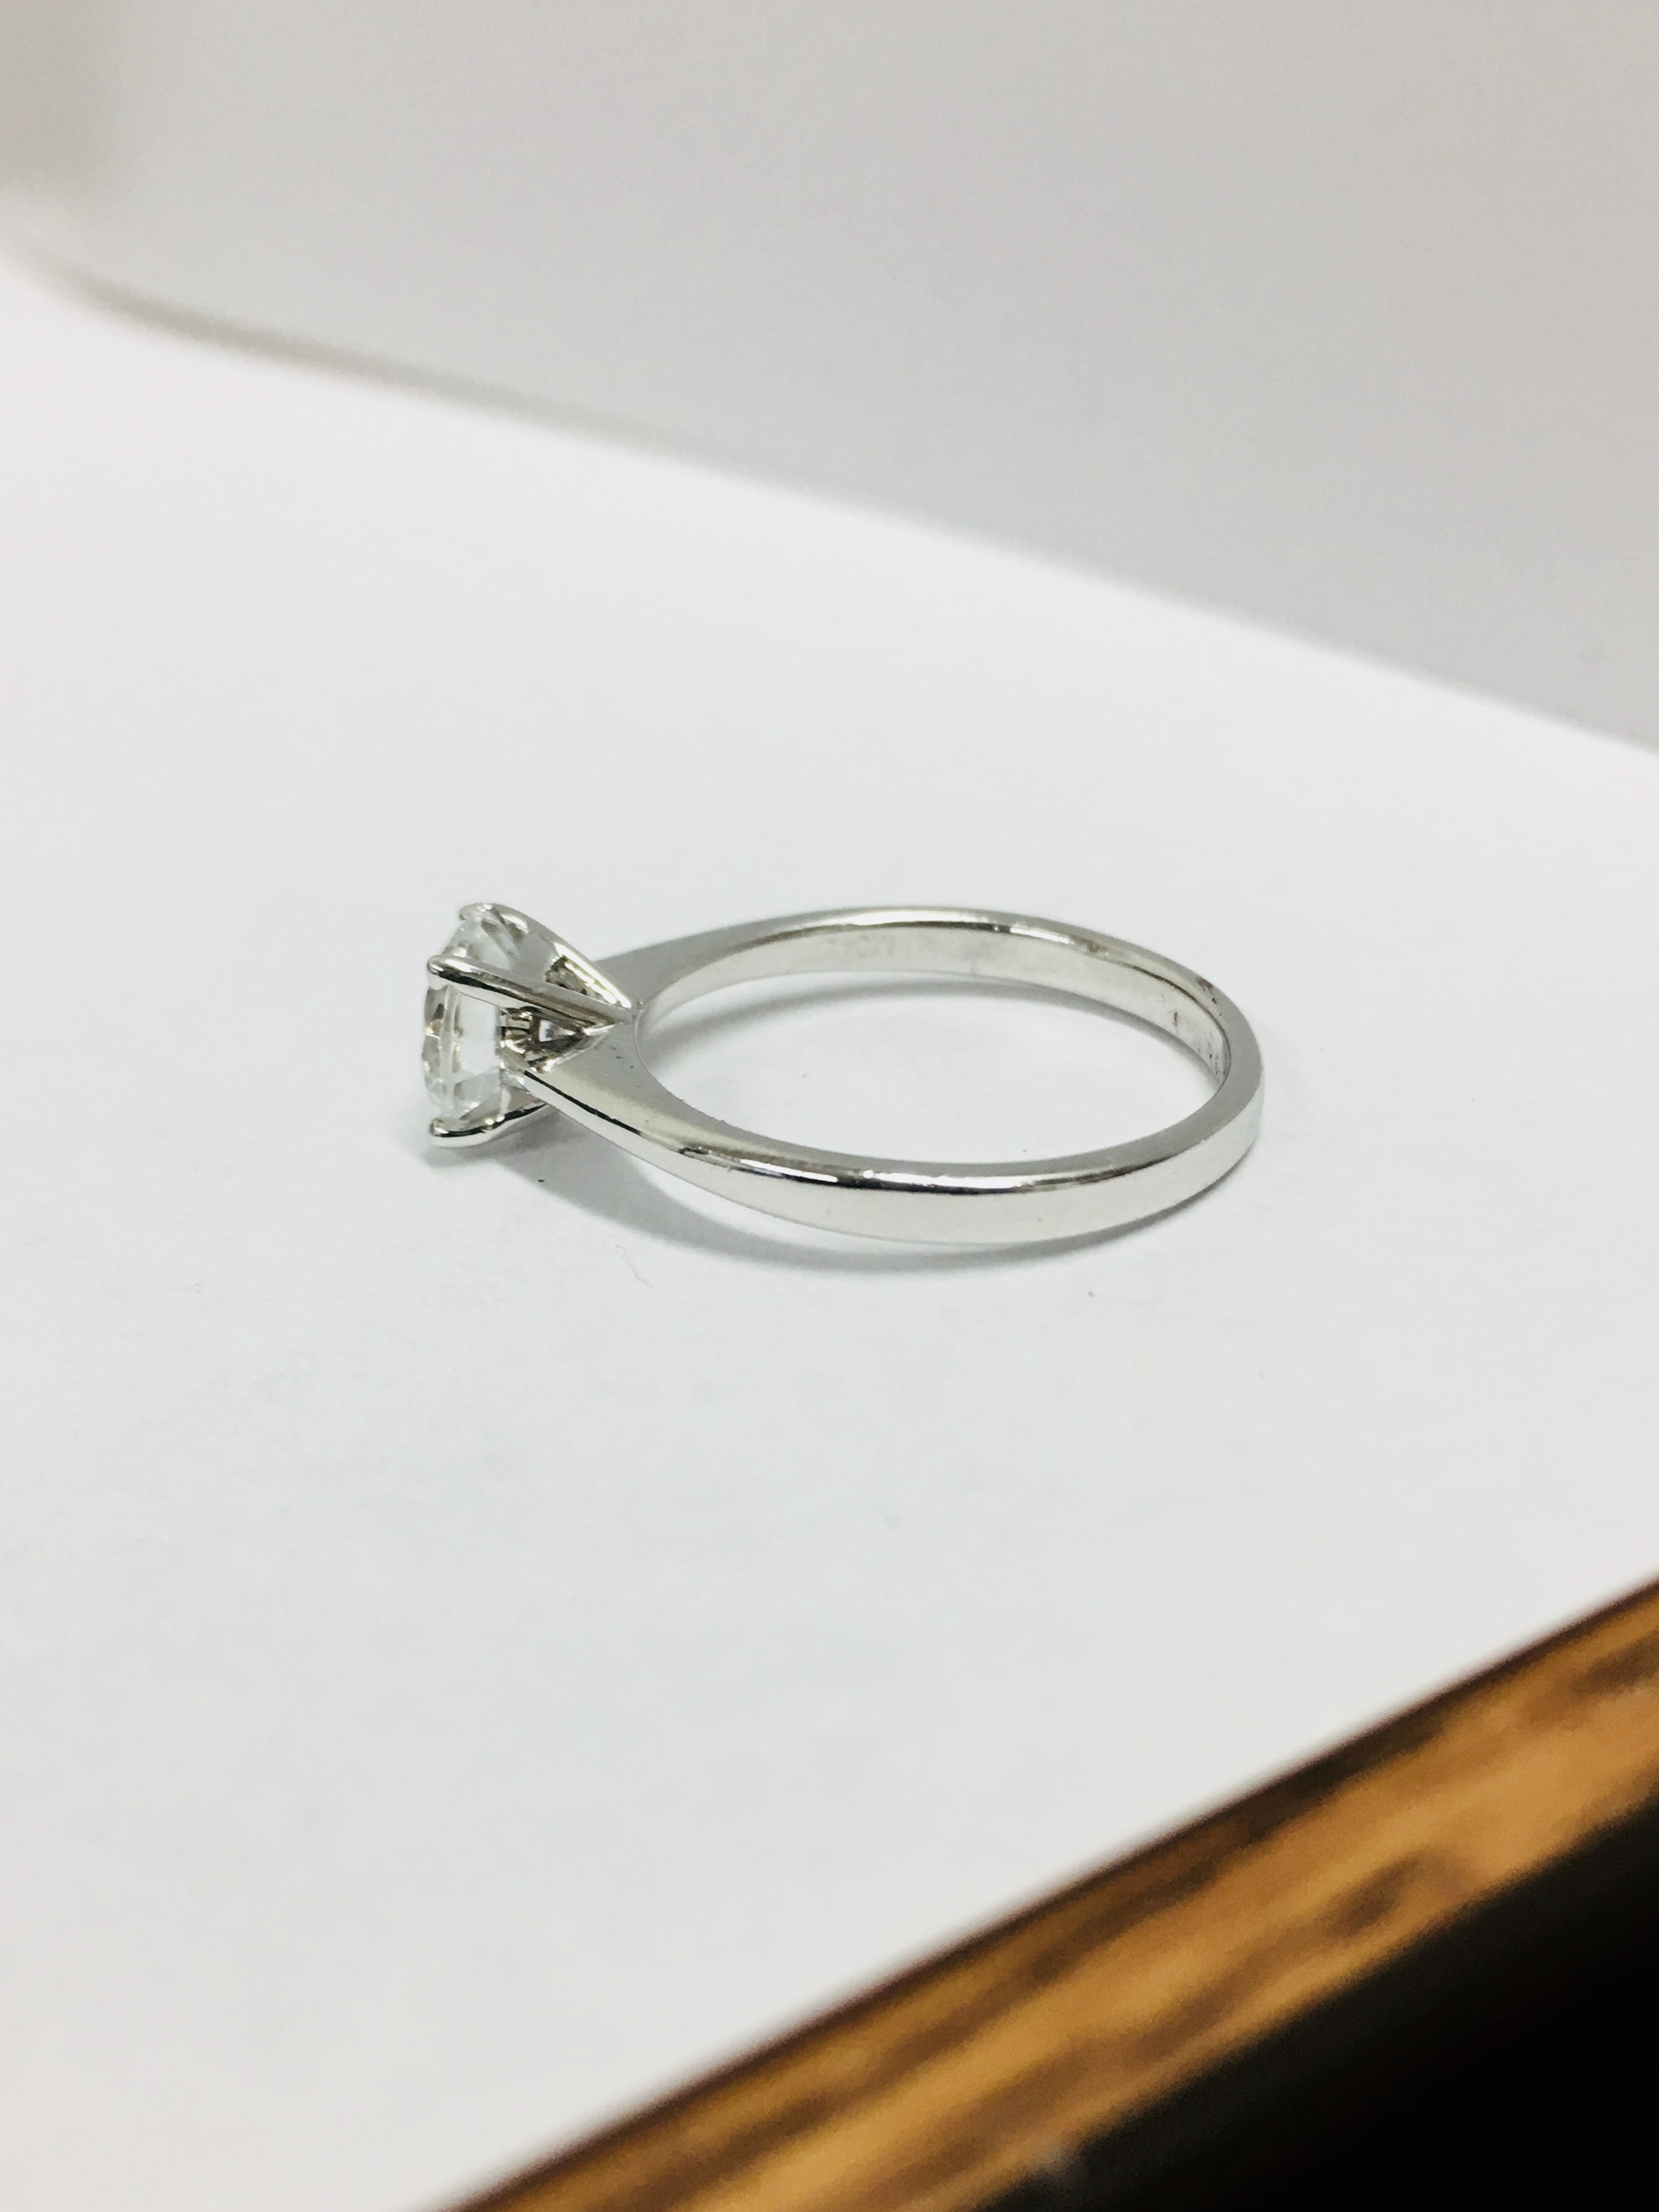 0.50Ct Diamond Solitaire Ring. - Image 2 of 4